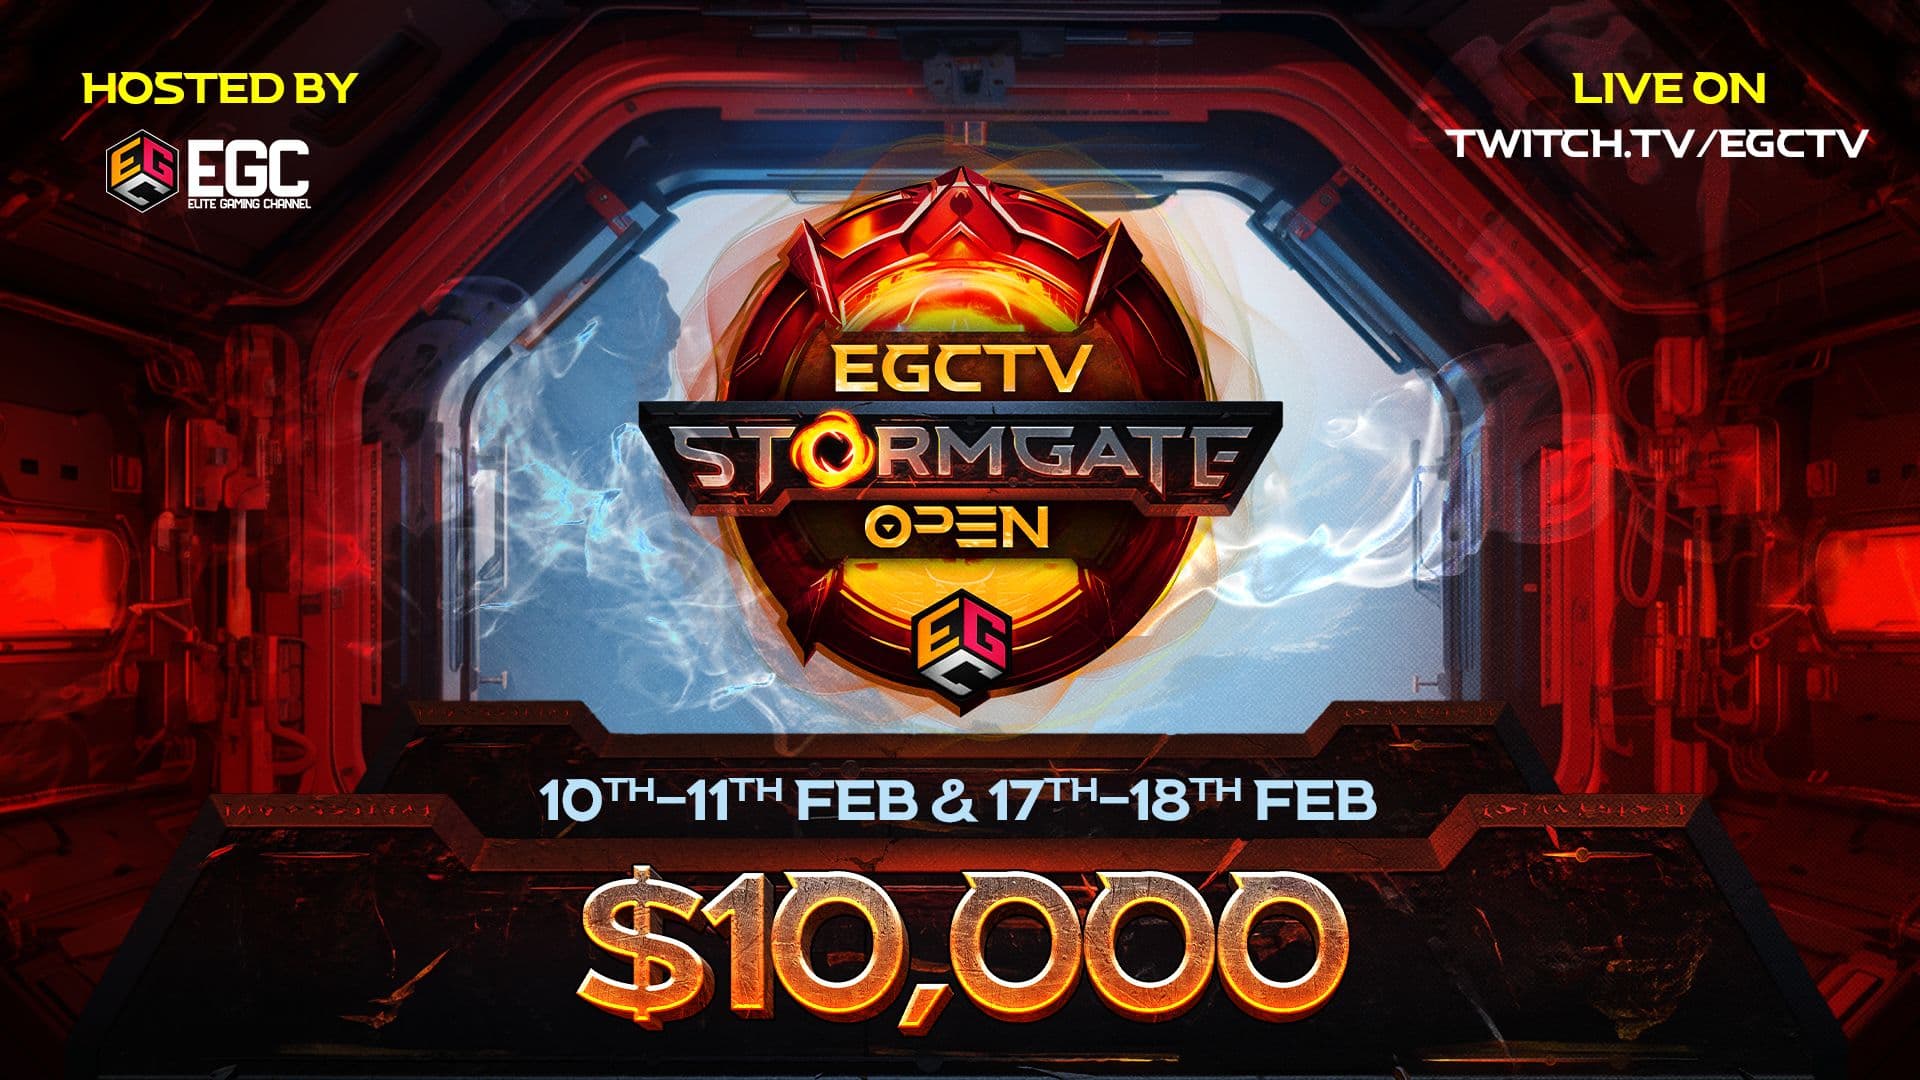 How to watch the $10,000 EGC Stormgate Open: Livestream options, start times, and more